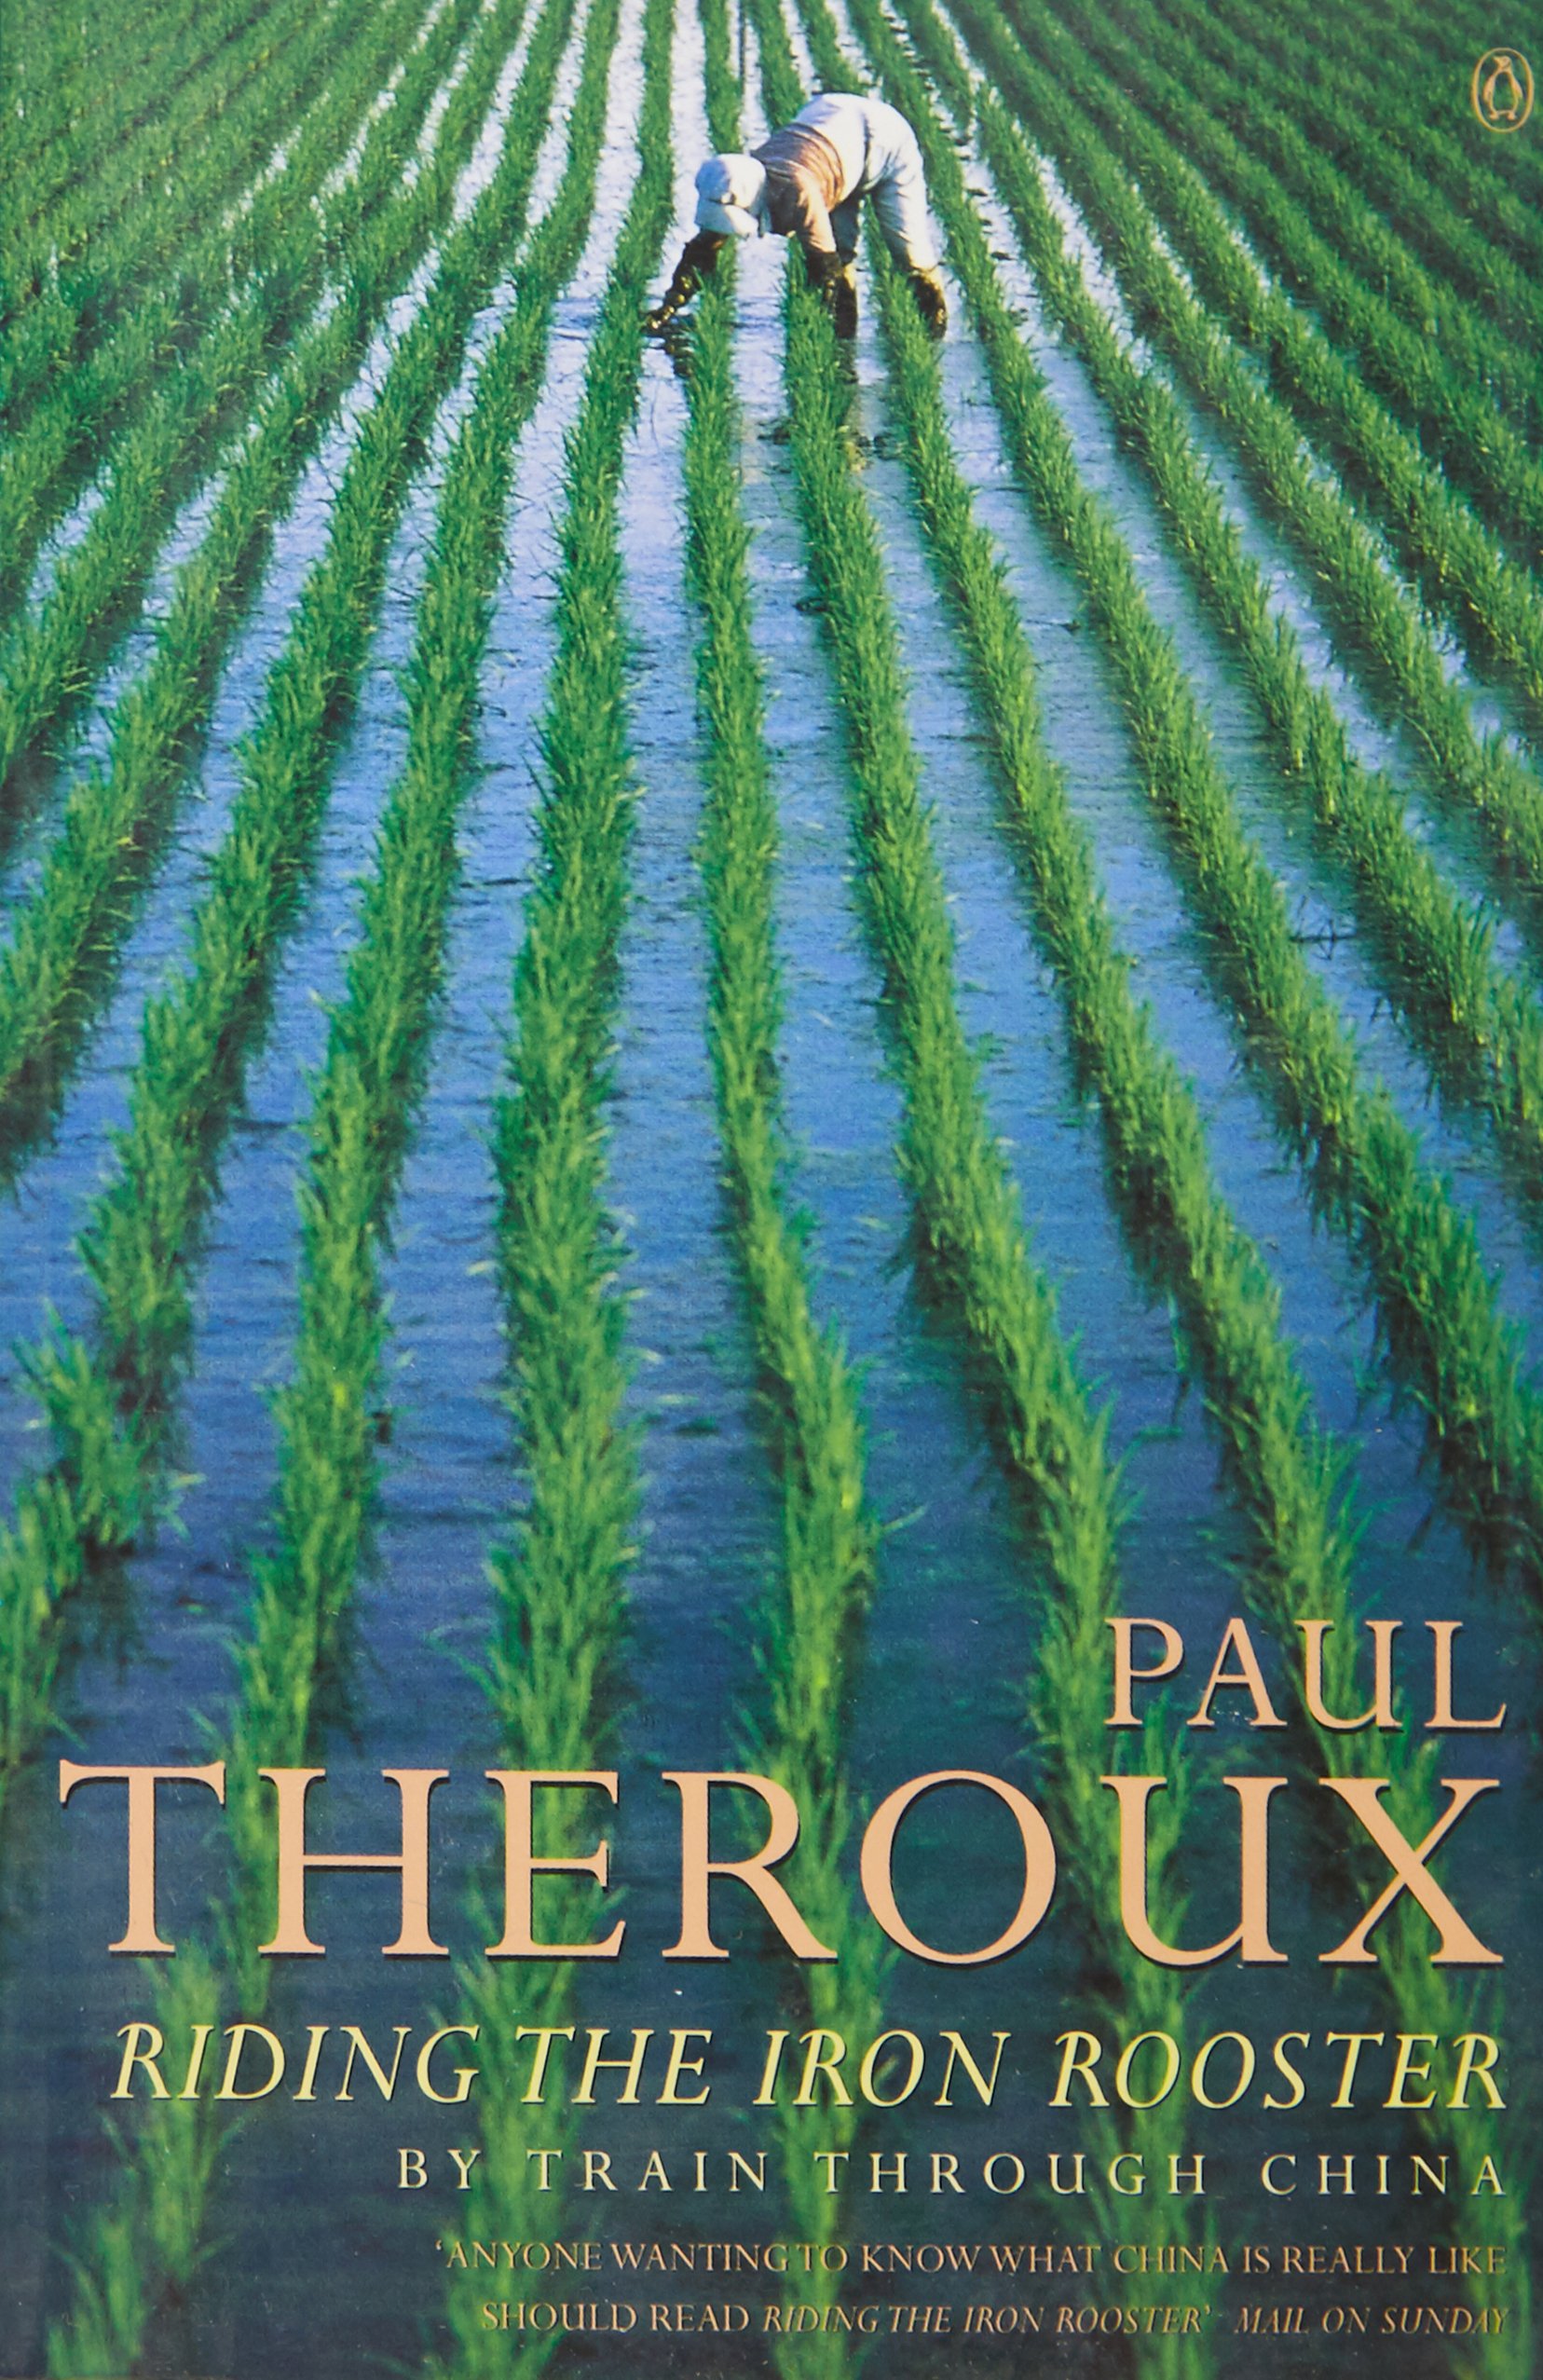 Riding the Iron Rooster: By Train Through China by Paul Theroux